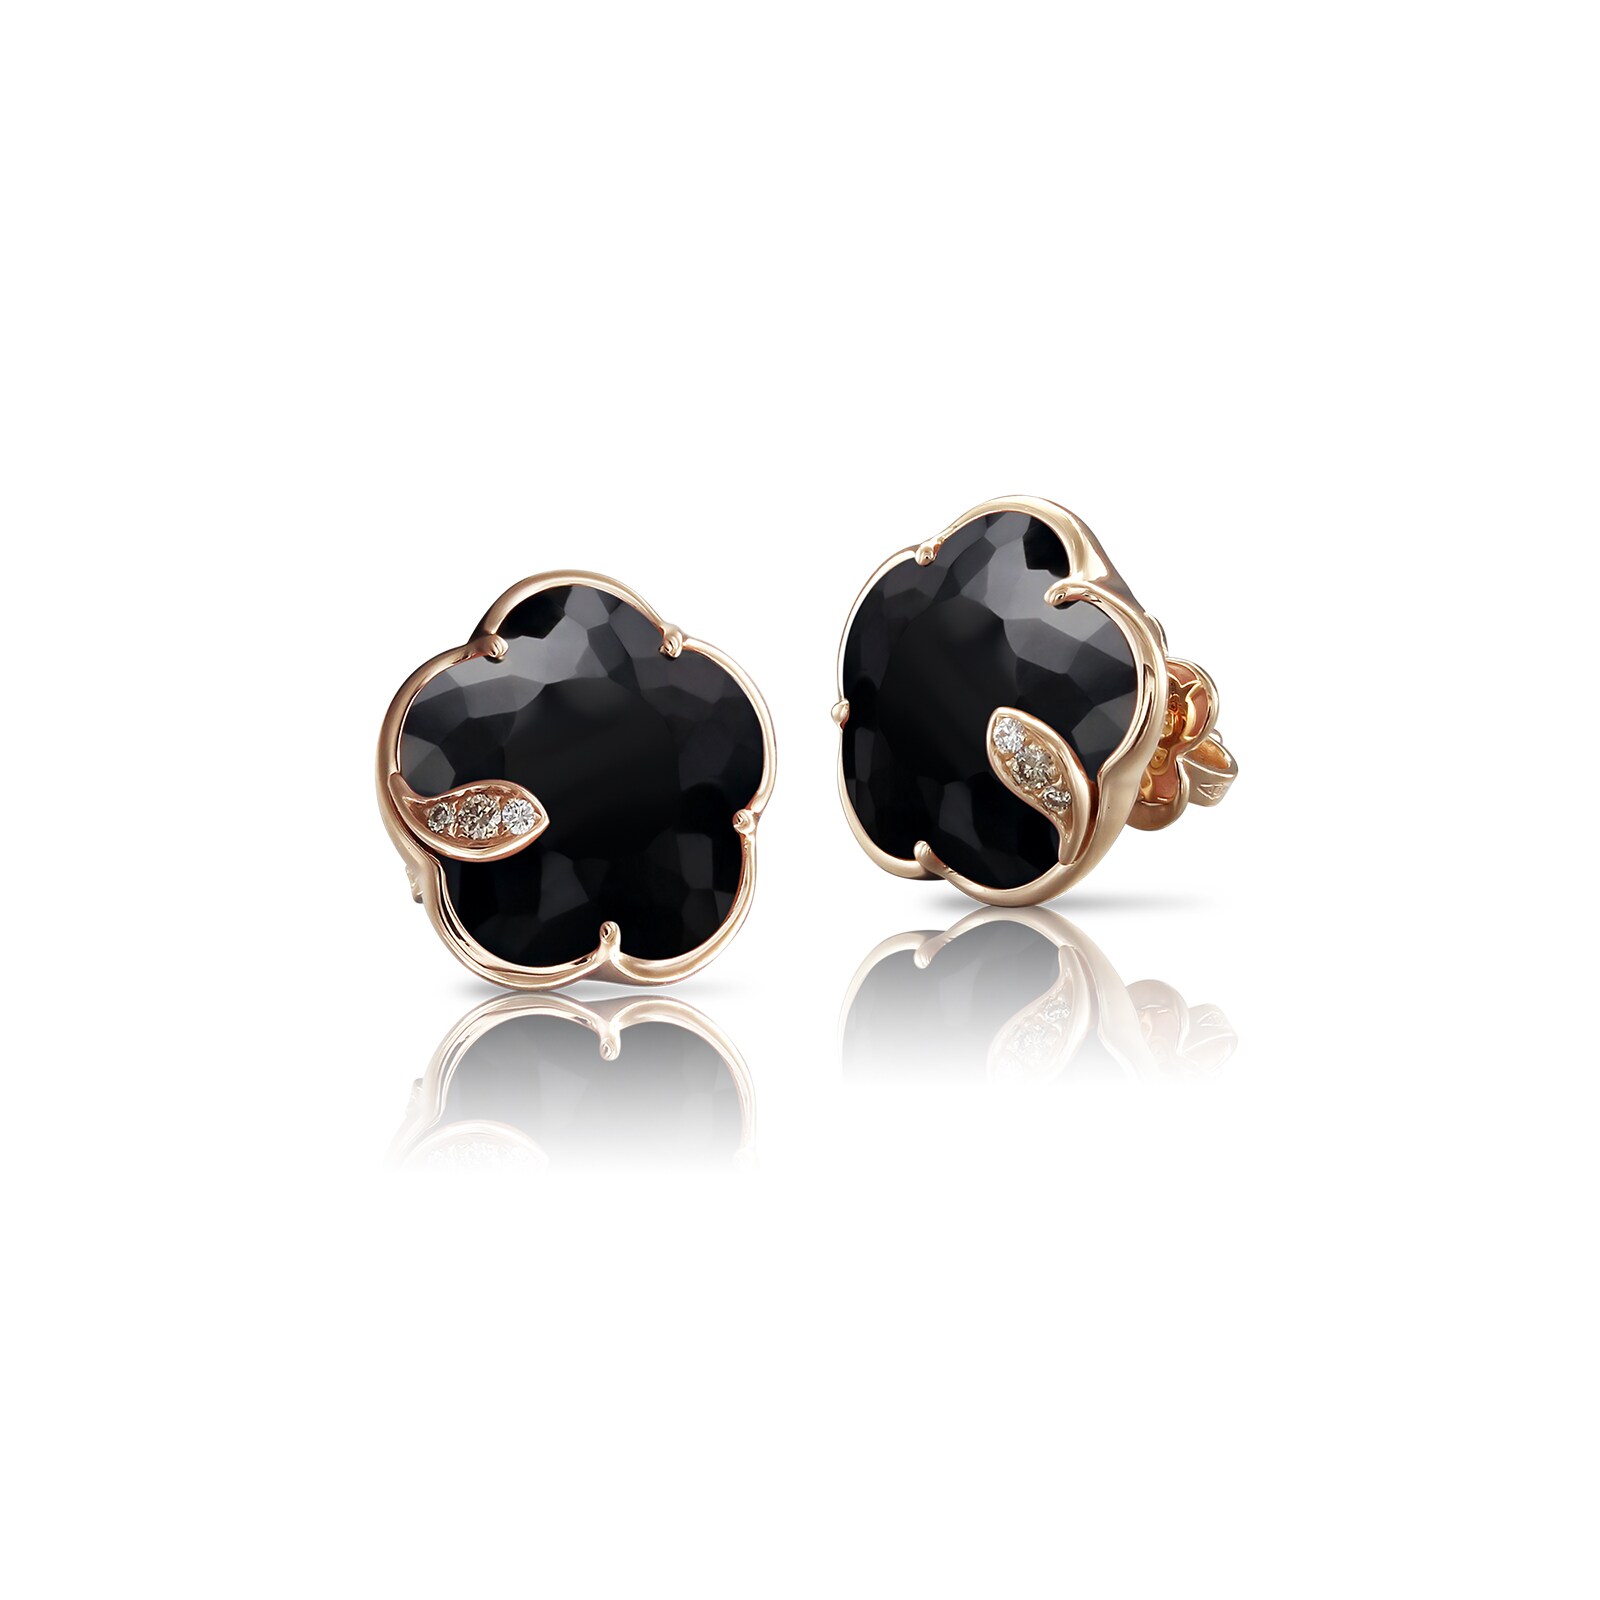 Petit Joli Earrings in 18ct Rose Gold with Onyx and Diamonds